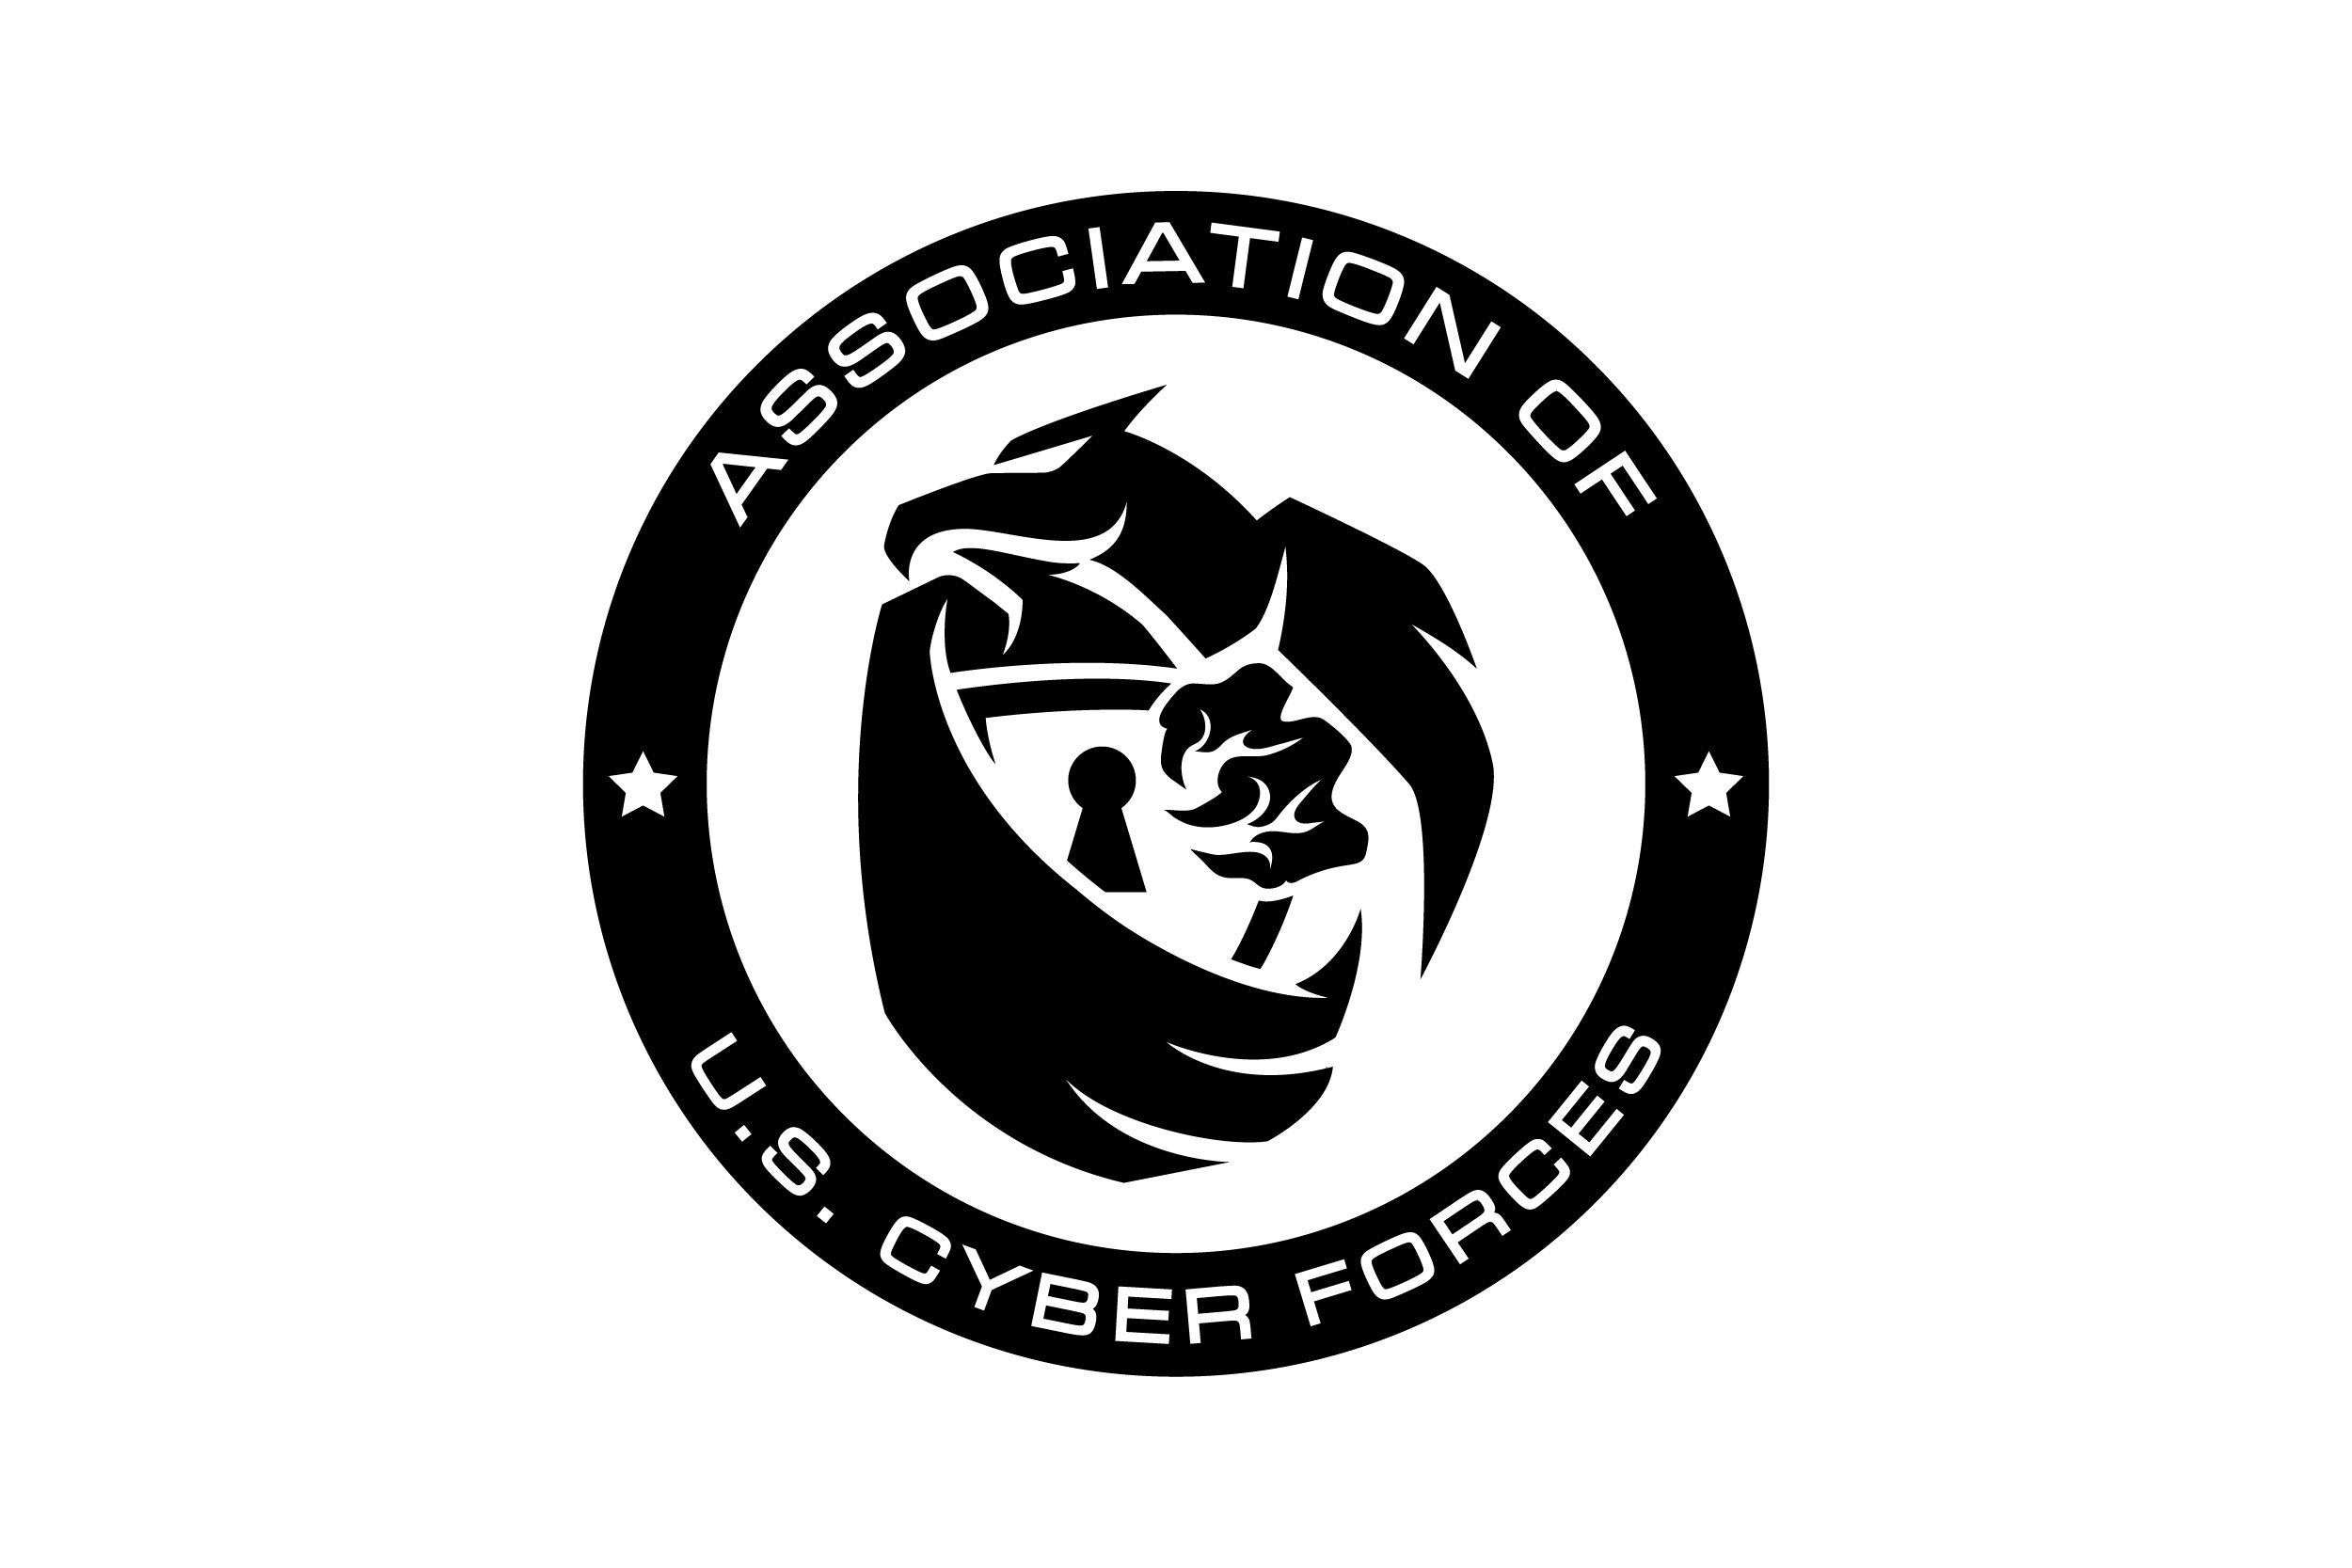 Association-of-US-Cyber-Forces-Black-color-White-background